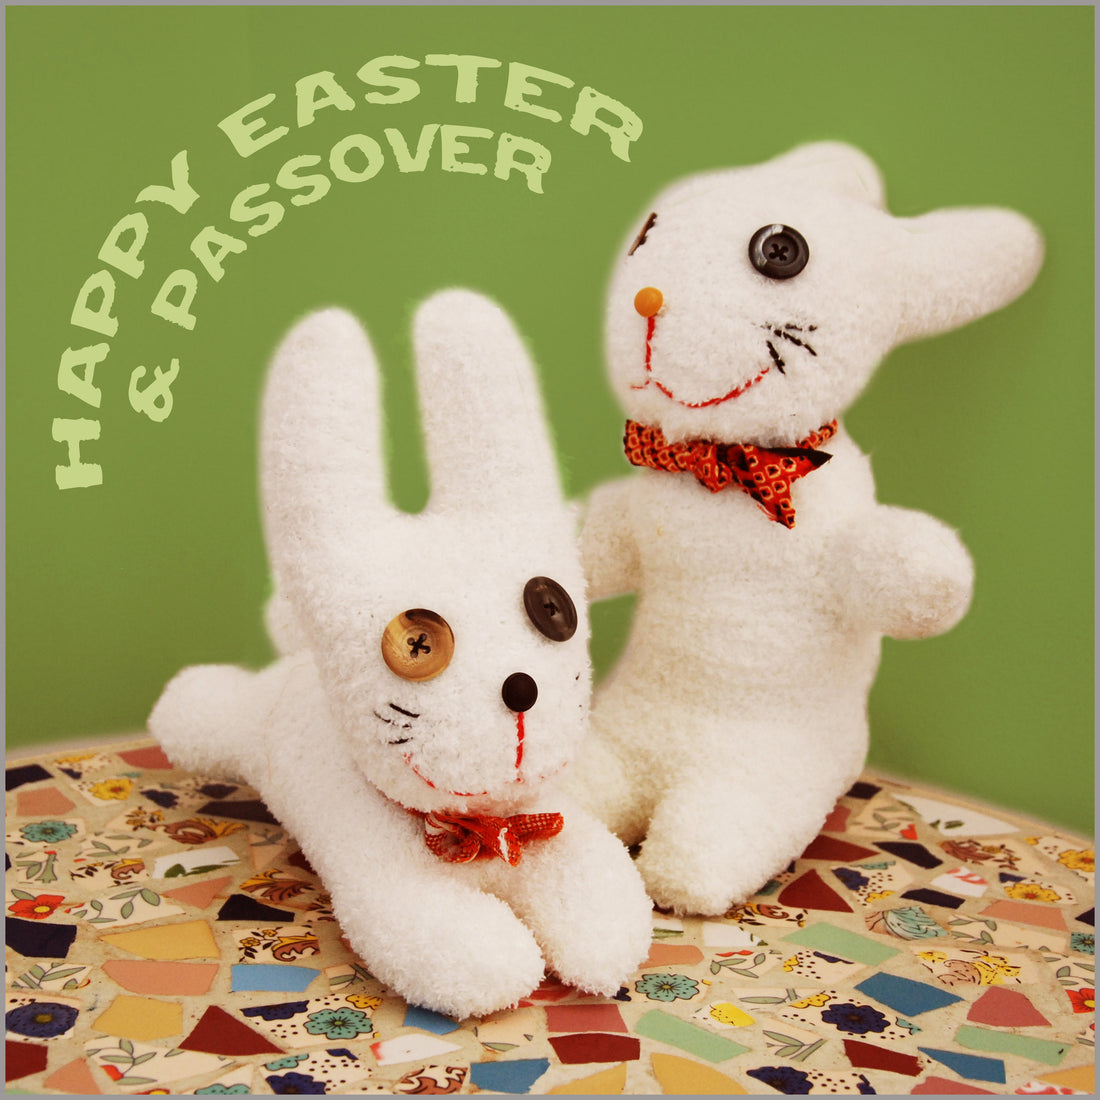 Happy Easter and Passover!